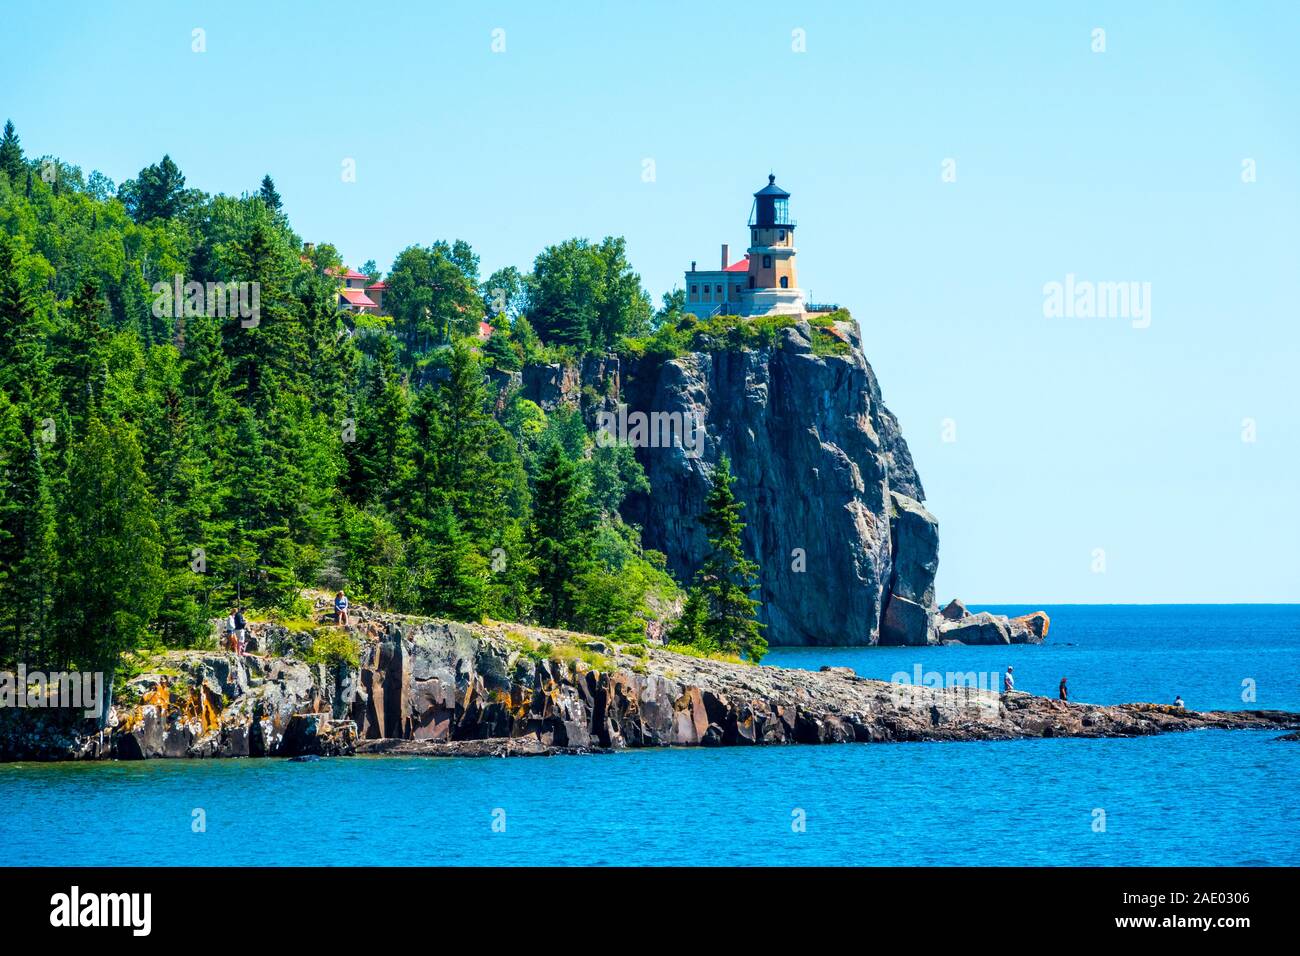 Split Rock Lighthouse is a lighthouse located southwest of Silver Bay, Minnesota, USA on the North Shore of Lake Superior. The structure was designed Stock Photo